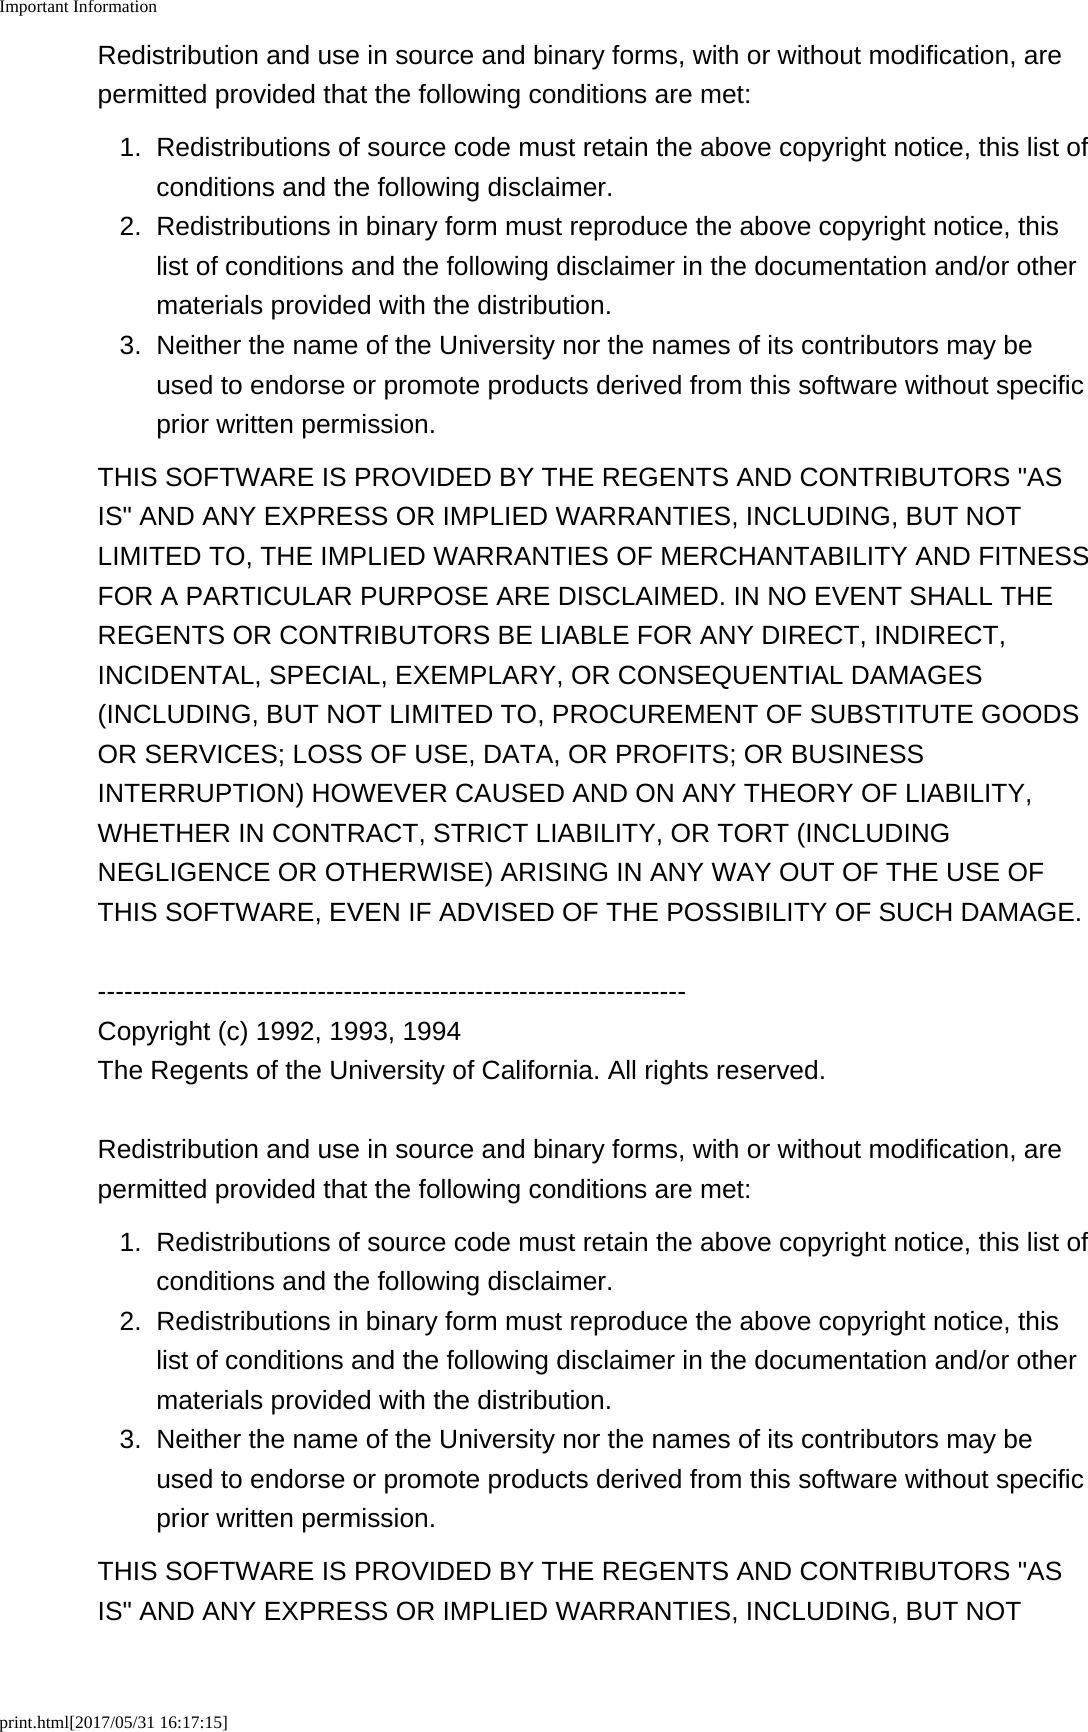 Important Informationprint.html[2017/05/31 16:17:15]Redistribution and use in source and binary forms, with or without modification, arepermitted provided that the following conditions are met:1. Redistributions of source code must retain the above copyright notice, this list ofconditions and the following disclaimer.2. Redistributions in binary form must reproduce the above copyright notice, thislist of conditions and the following disclaimer in the documentation and/or othermaterials provided with the distribution.3. Neither the name of the University nor the names of its contributors may beused to endorse or promote products derived from this software without specificprior written permission.THIS SOFTWARE IS PROVIDED BY THE REGENTS AND CONTRIBUTORS &quot;ASIS&quot; AND ANY EXPRESS OR IMPLIED WARRANTIES, INCLUDING, BUT NOTLIMITED TO, THE IMPLIED WARRANTIES OF MERCHANTABILITY AND FITNESSFOR A PARTICULAR PURPOSE ARE DISCLAIMED. IN NO EVENT SHALL THEREGENTS OR CONTRIBUTORS BE LIABLE FOR ANY DIRECT, INDIRECT,INCIDENTAL, SPECIAL, EXEMPLARY, OR CONSEQUENTIAL DAMAGES(INCLUDING, BUT NOT LIMITED TO, PROCUREMENT OF SUBSTITUTE GOODSOR SERVICES; LOSS OF USE, DATA, OR PROFITS; OR BUSINESSINTERRUPTION) HOWEVER CAUSED AND ON ANY THEORY OF LIABILITY,WHETHER IN CONTRACT, STRICT LIABILITY, OR TORT (INCLUDINGNEGLIGENCE OR OTHERWISE) ARISING IN ANY WAY OUT OF THE USE OFTHIS SOFTWARE, EVEN IF ADVISED OF THE POSSIBILITY OF SUCH DAMAGE.-------------------------------------------------------------------Copyright (c) 1992, 1993, 1994The Regents of the University of California. All rights reserved.Redistribution and use in source and binary forms, with or without modification, arepermitted provided that the following conditions are met:1. Redistributions of source code must retain the above copyright notice, this list ofconditions and the following disclaimer.2.Redistributions in binary form must reproduce the above copyright notice, thislist of conditions and the following disclaimer in the documentation and/or othermaterials provided with the distribution.3. Neither the name of the University nor the names of its contributors may beused to endorse or promote products derived from this software without specificprior written permission.THIS SOFTWARE IS PROVIDED BY THE REGENTS AND CONTRIBUTORS &quot;ASIS&quot; AND ANY EXPRESS OR IMPLIED WARRANTIES, INCLUDING, BUT NOT